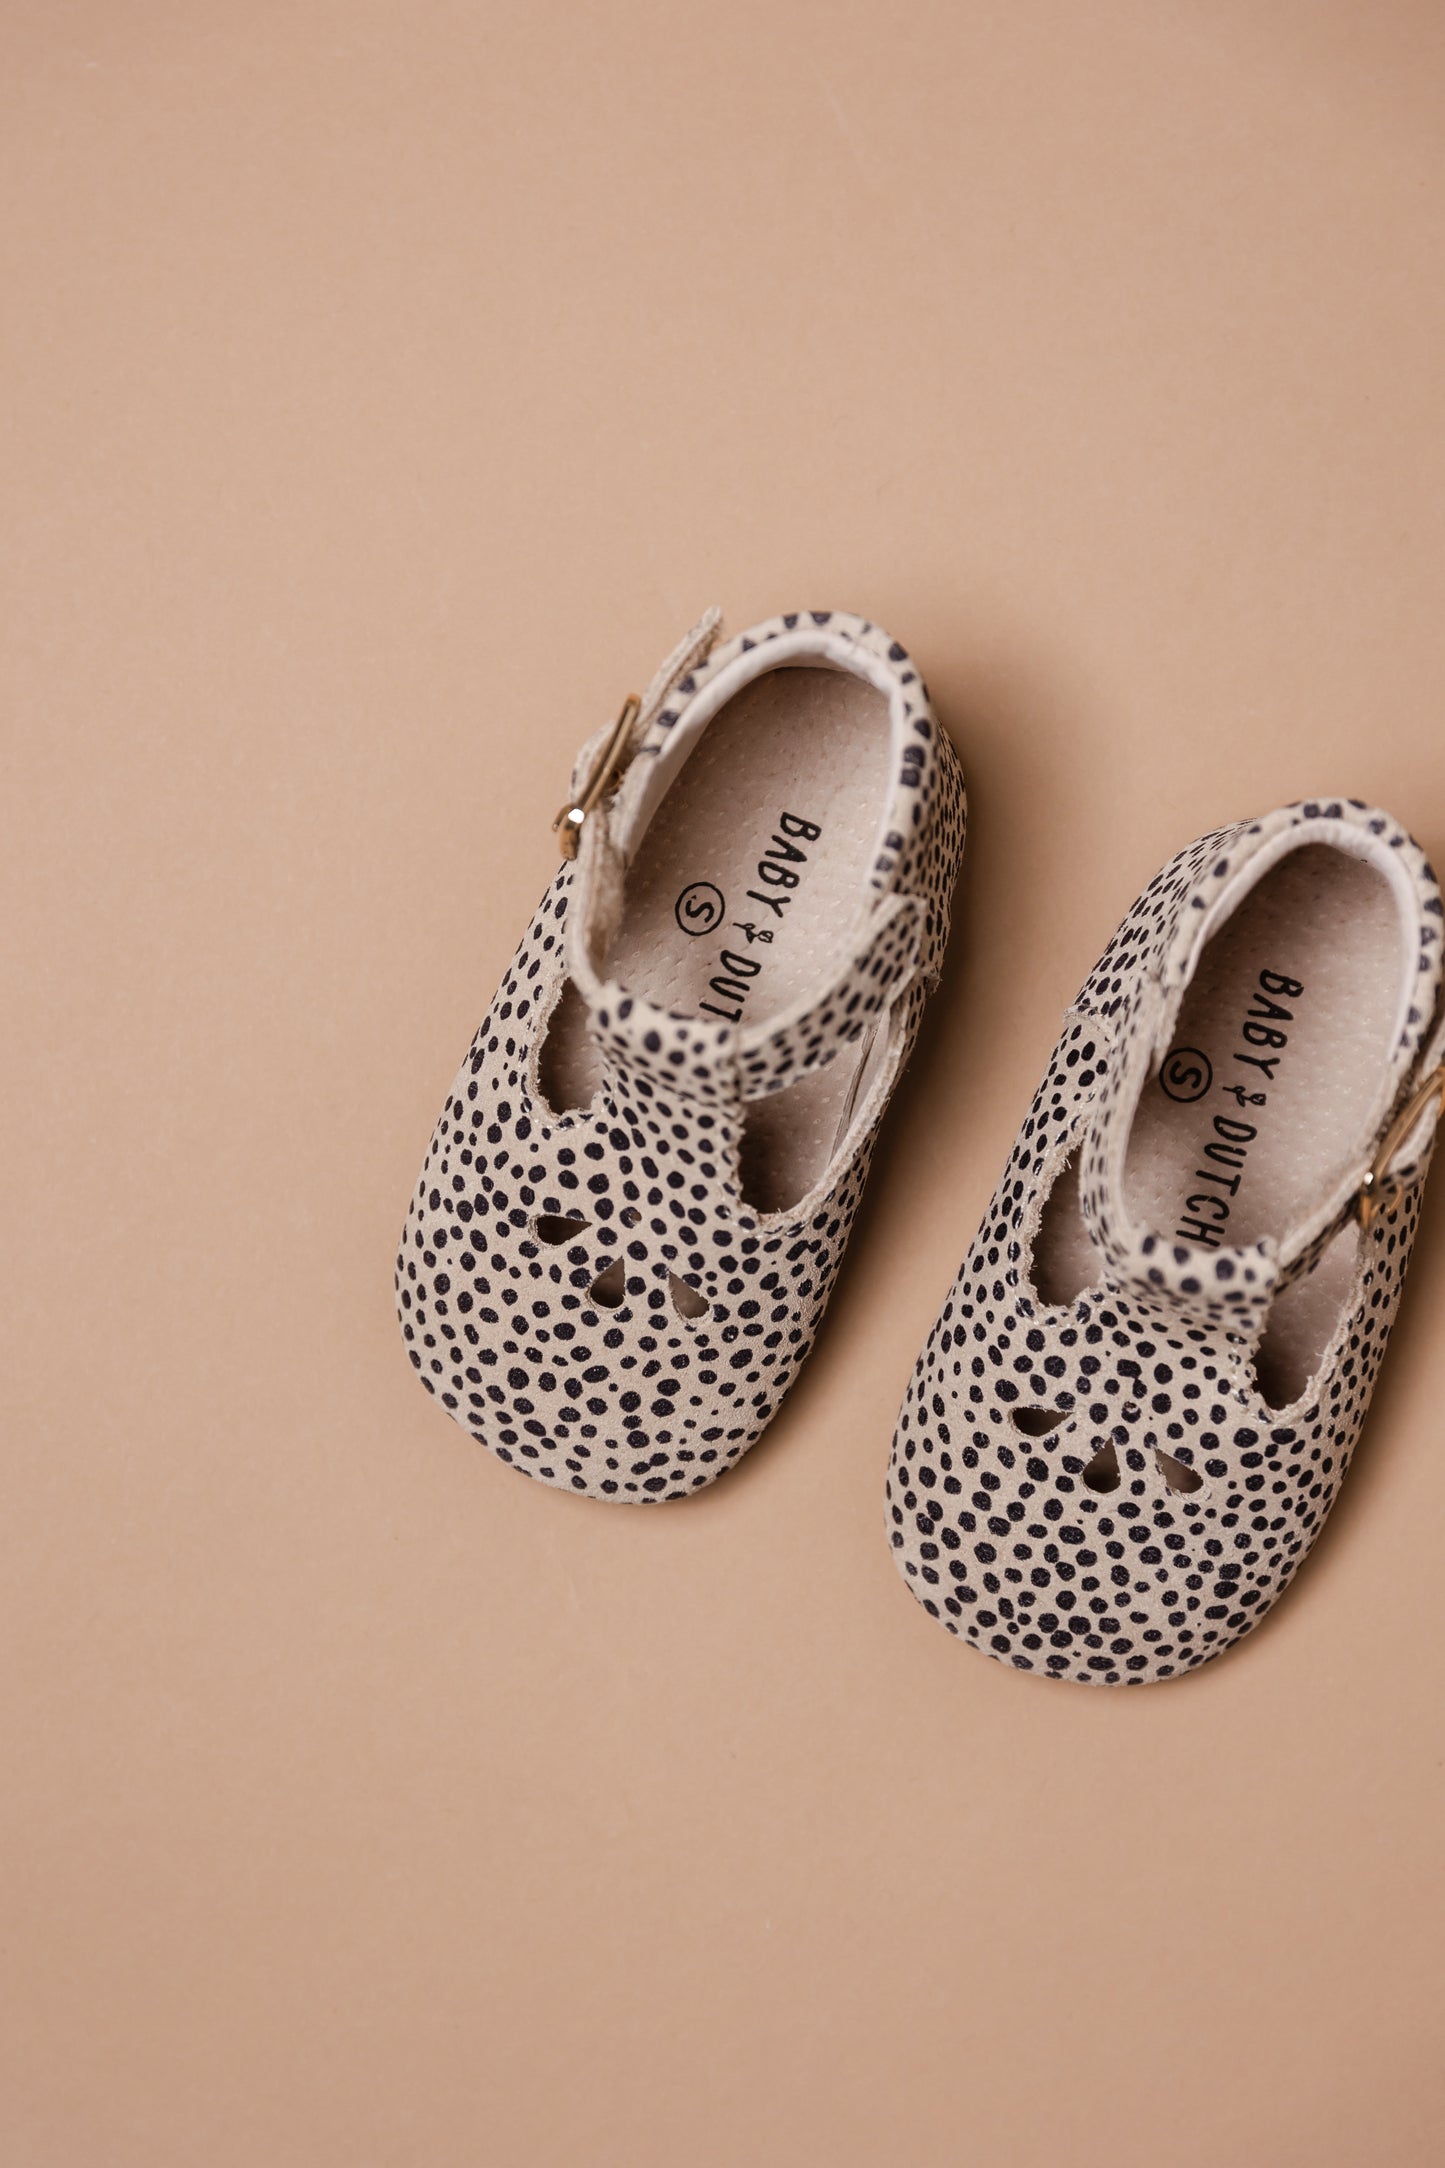 Evi | Babyboots | Speckle suede